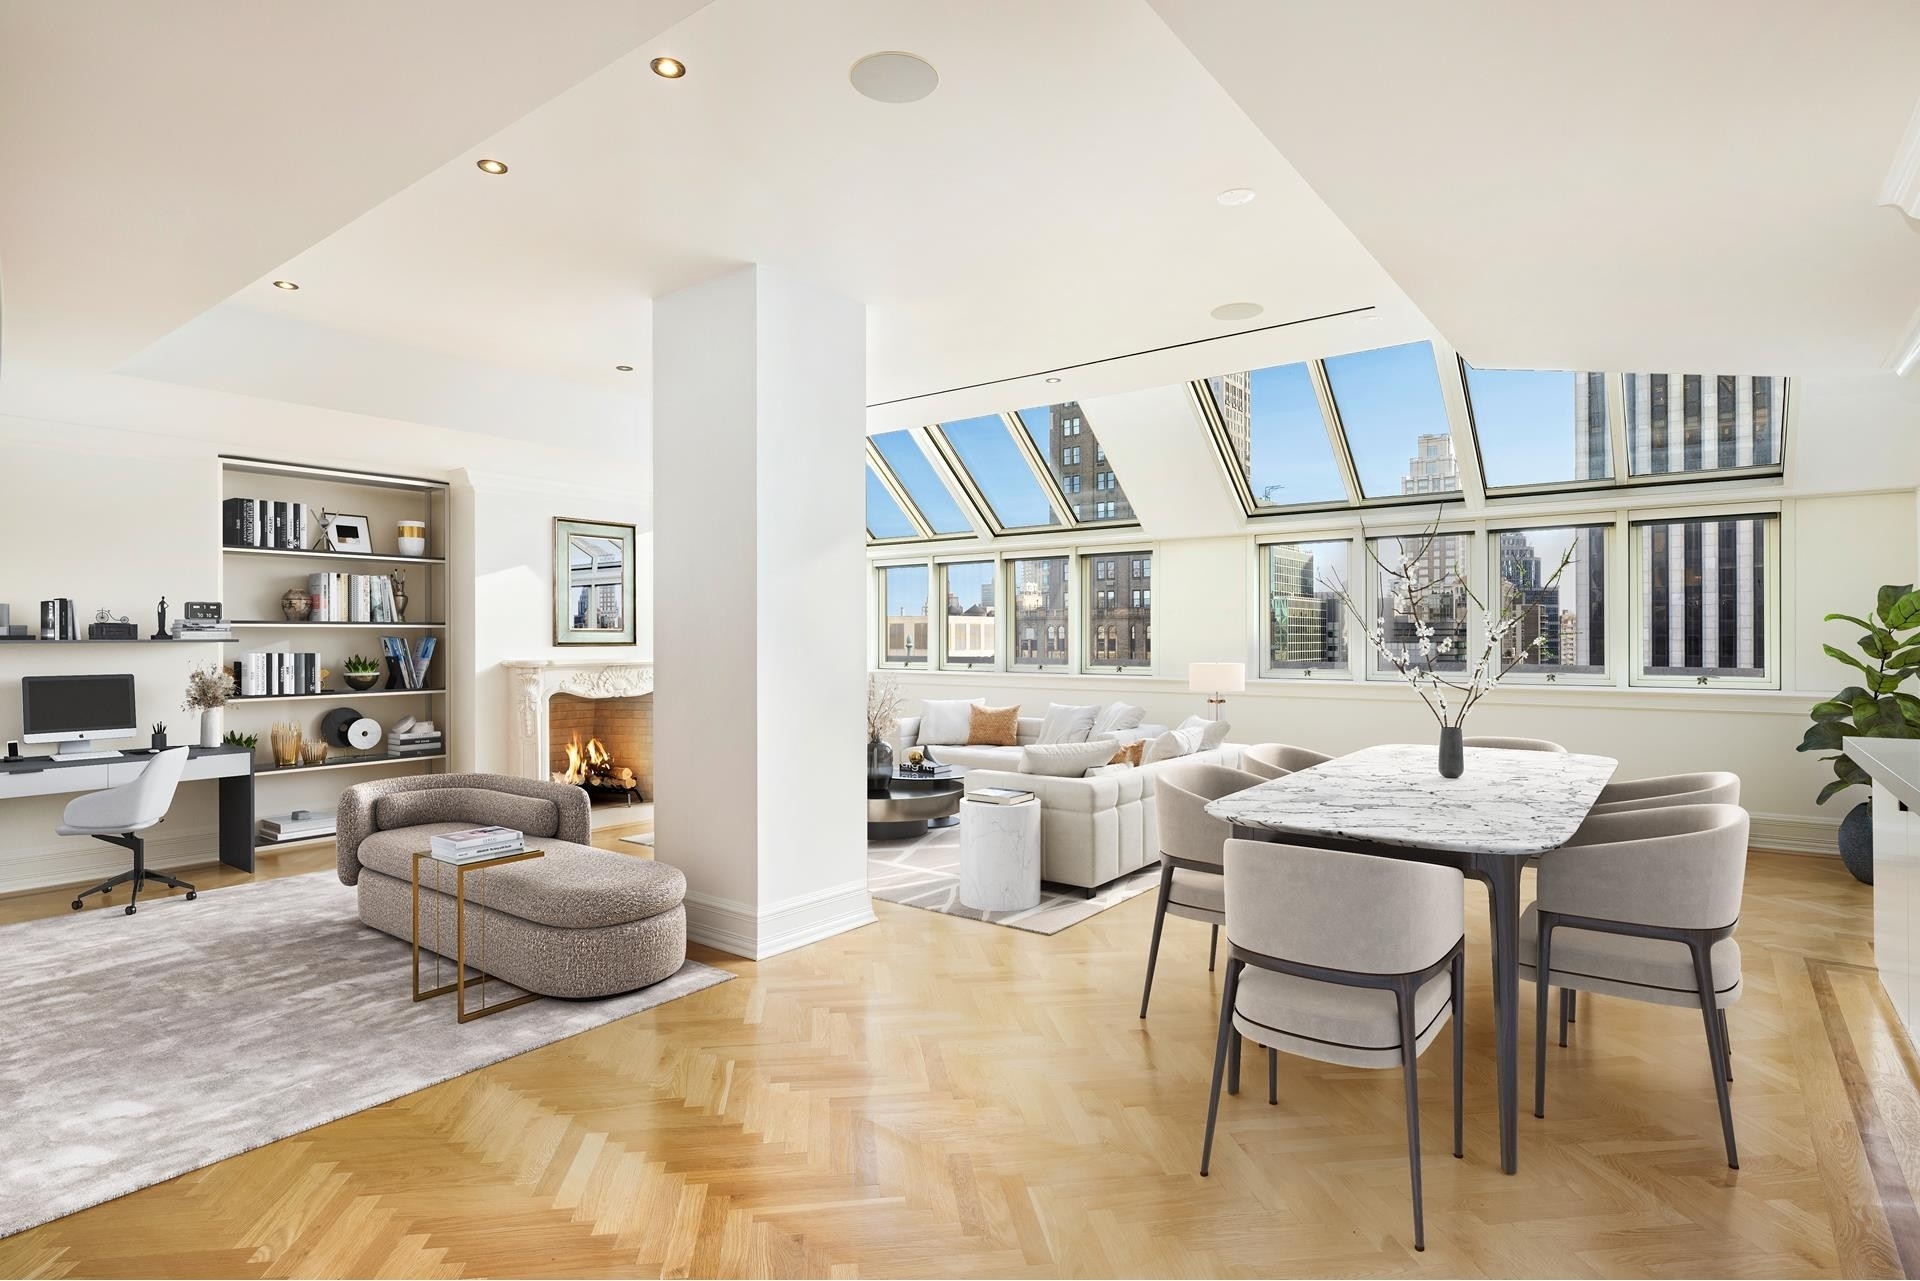 Condominium for Sale at The Plaza Residence, 1 CENTRAL PARK S, PH11 Central Park South, New York, NY 10019